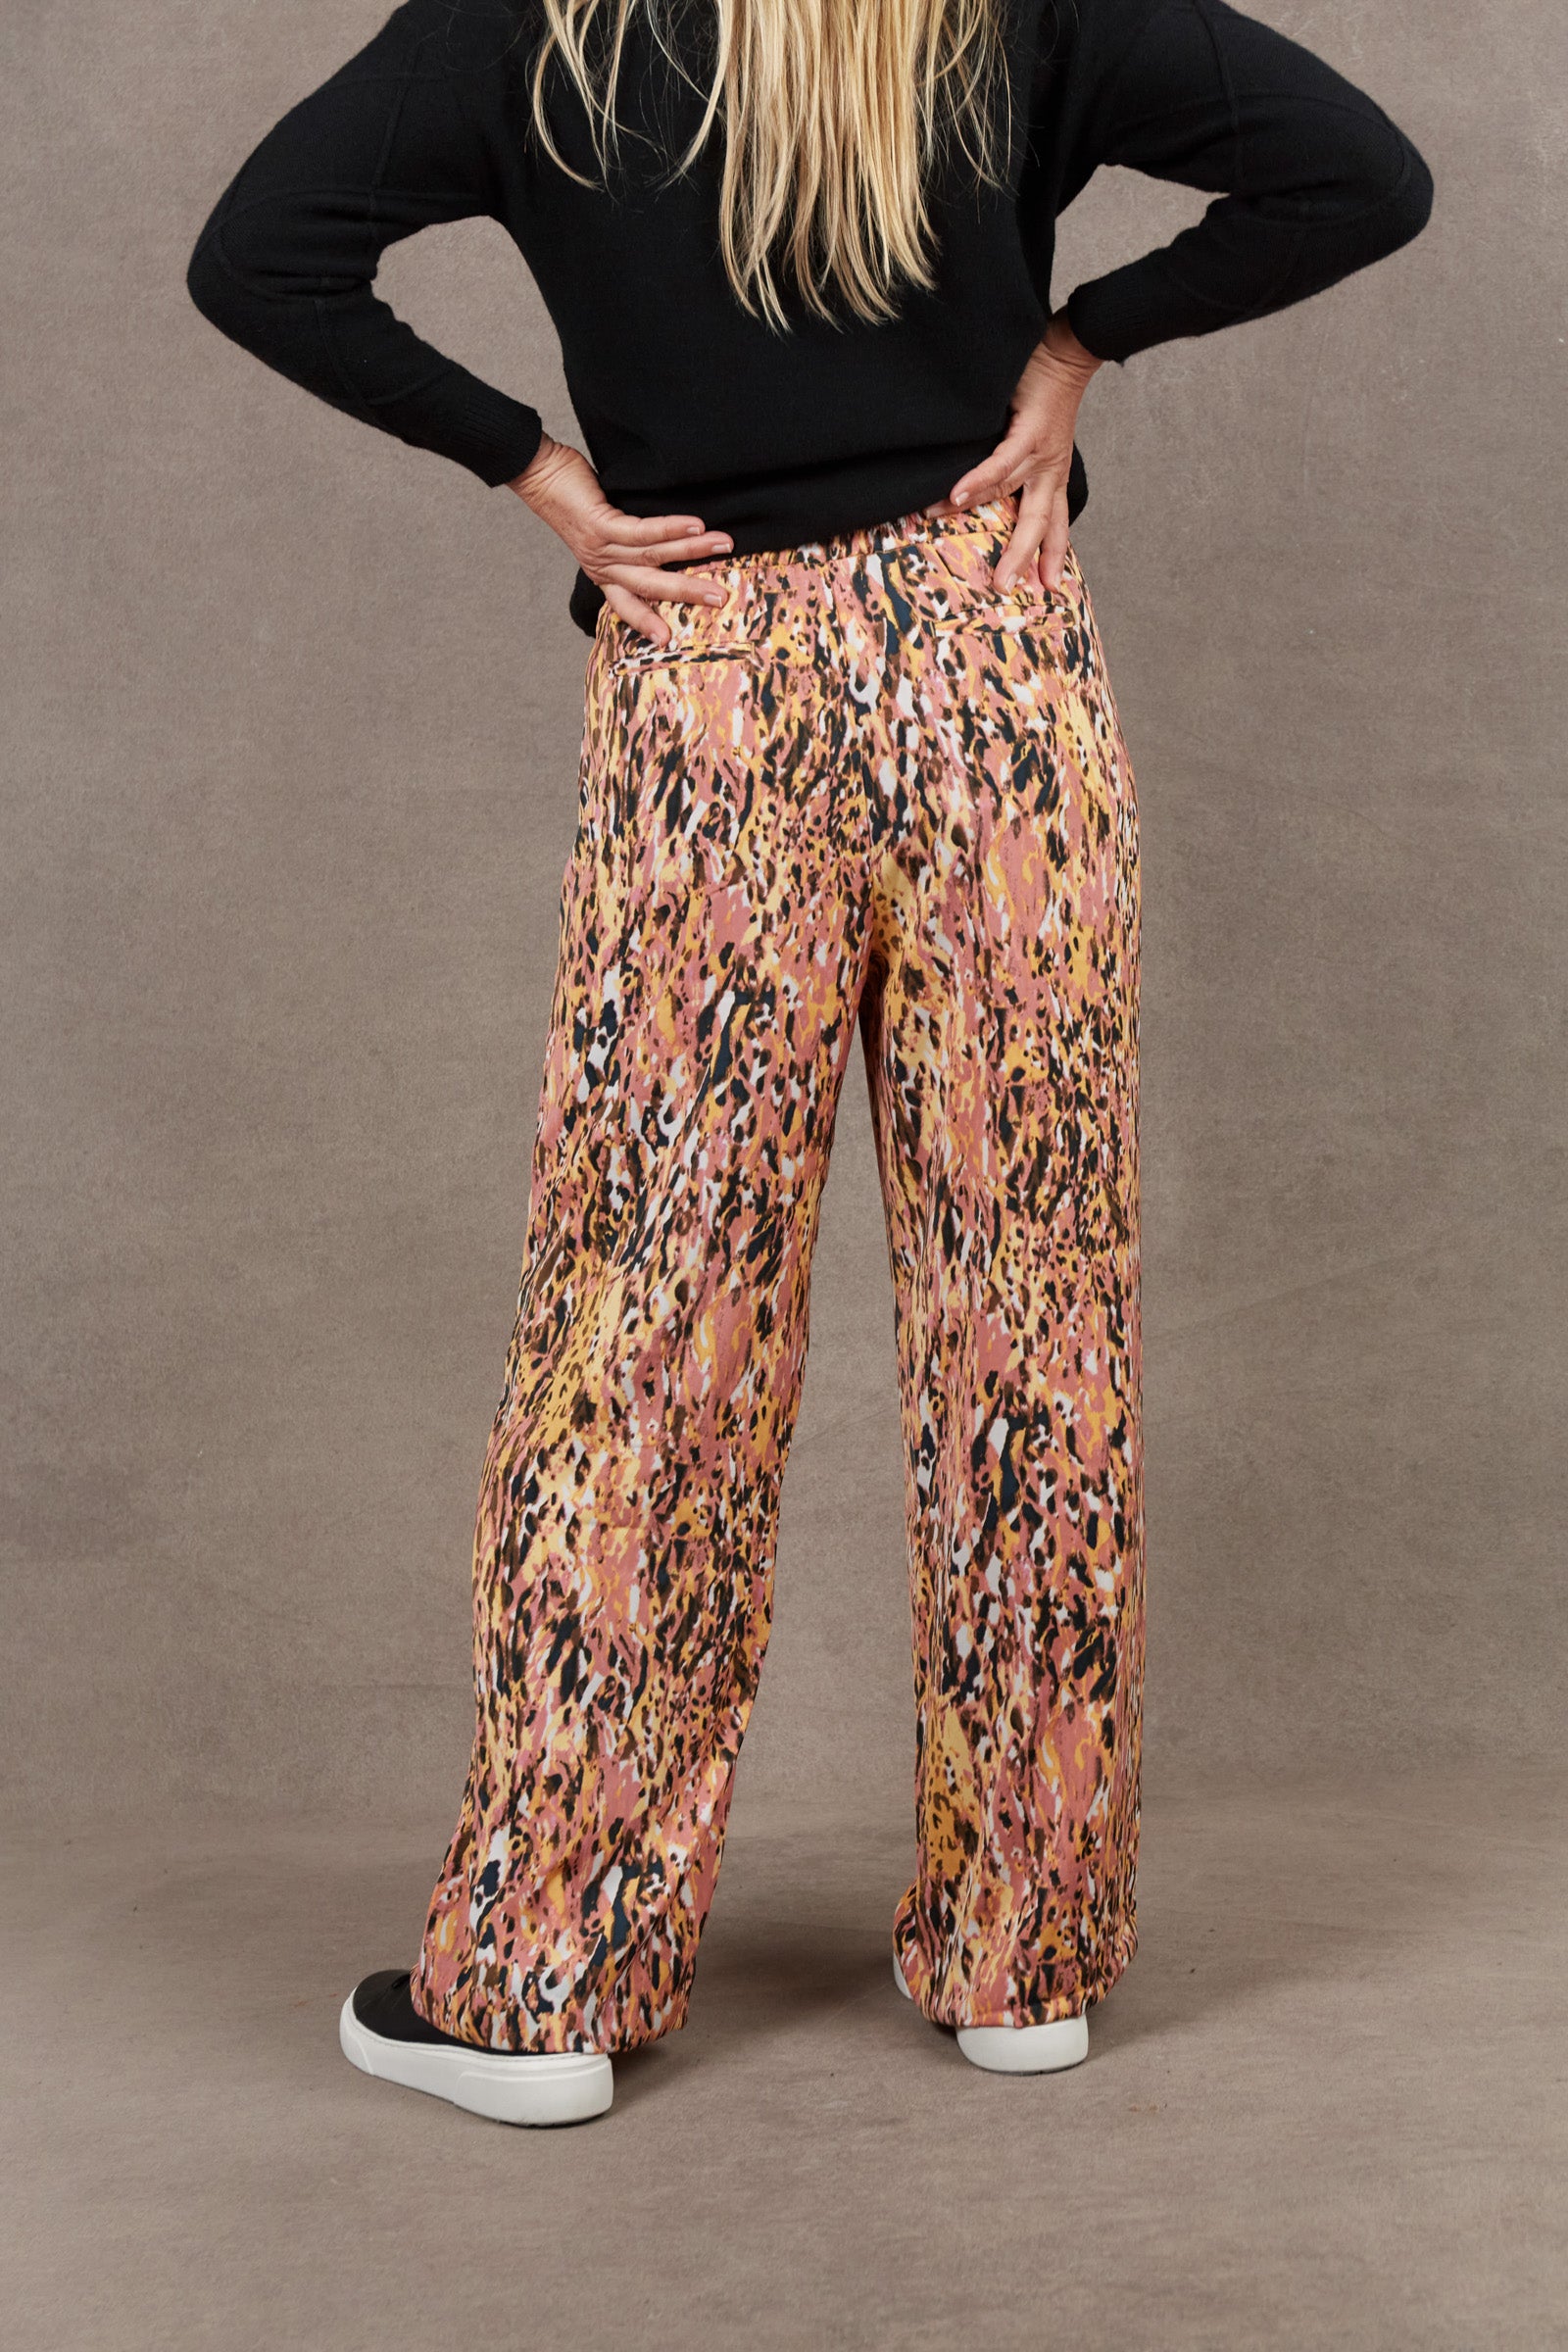 Mayan Pant - Ochre - eb&ive Clothing - Pant Wide